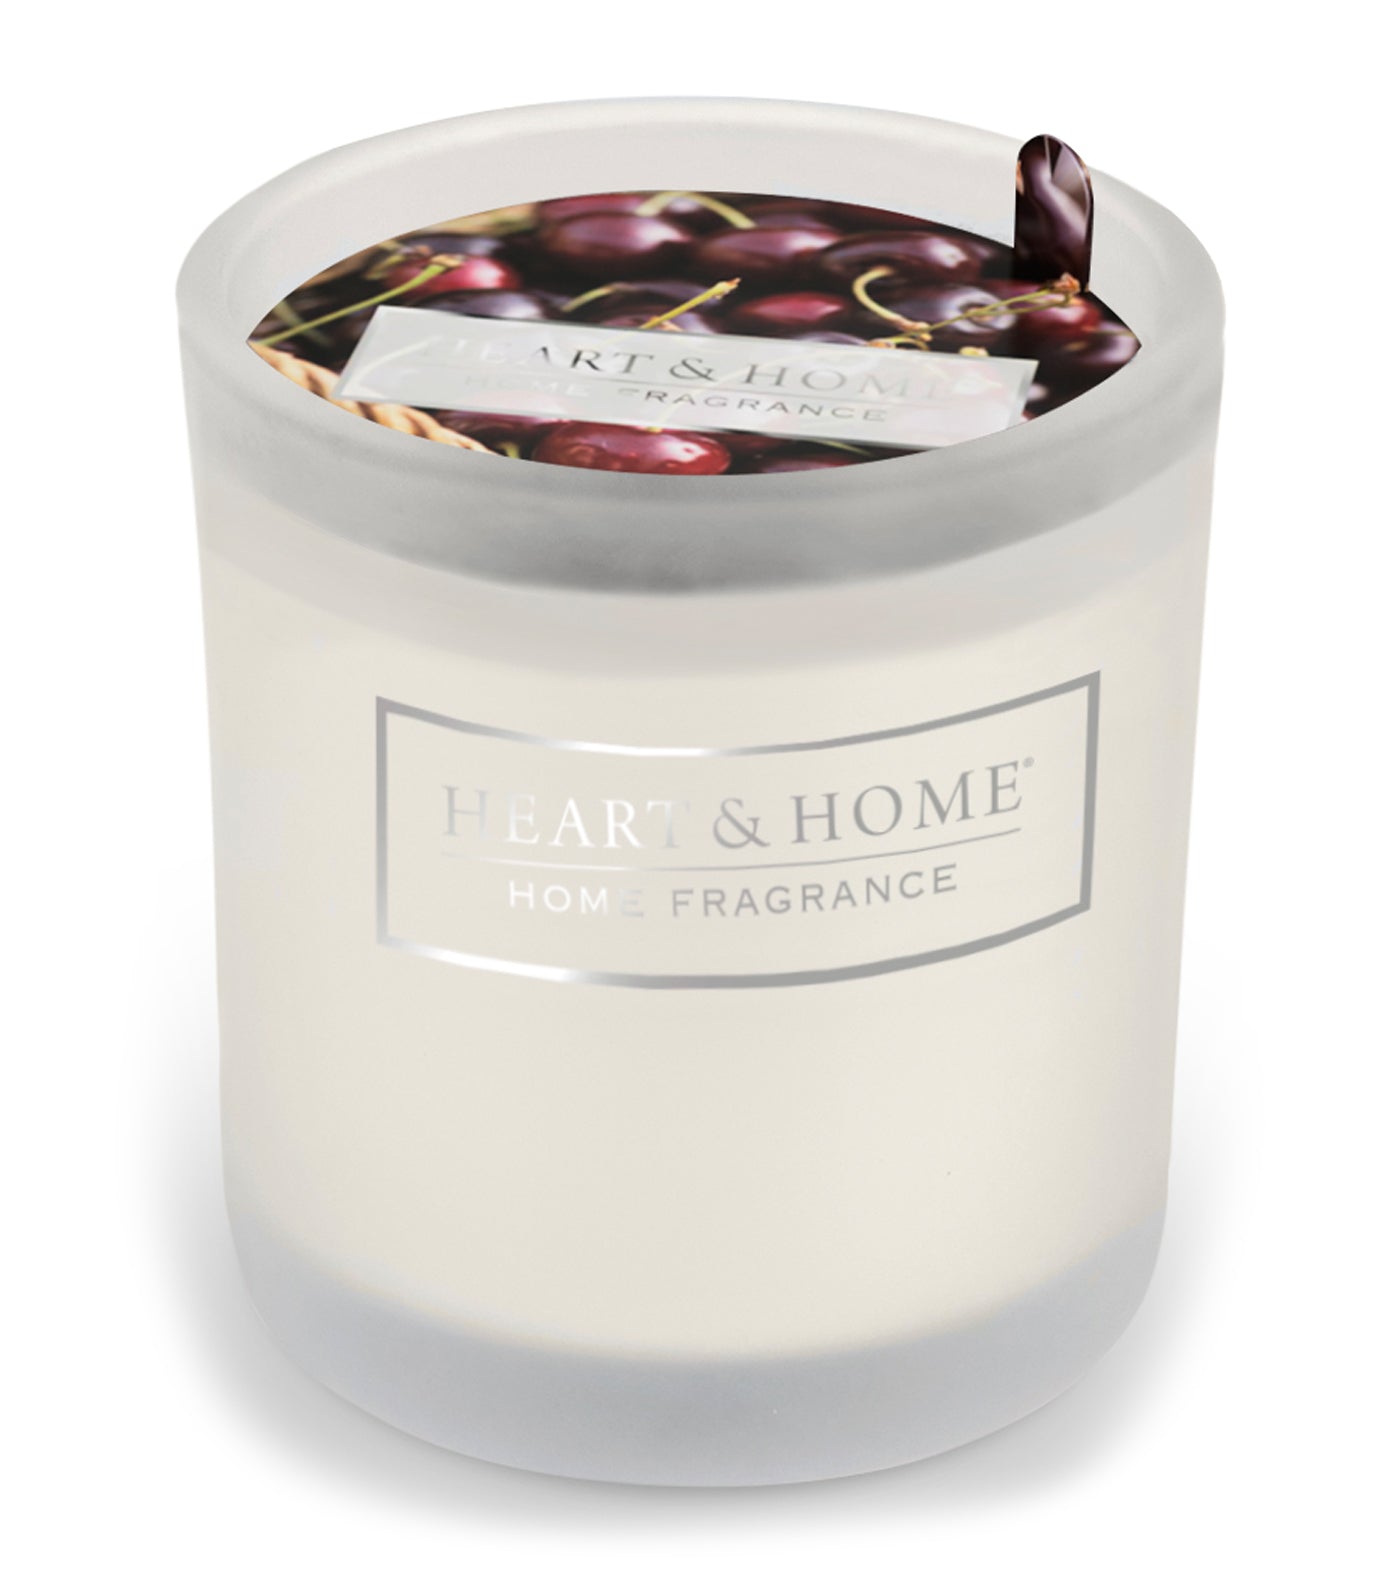 heart & home sweet black cherries - glass votive soy candle